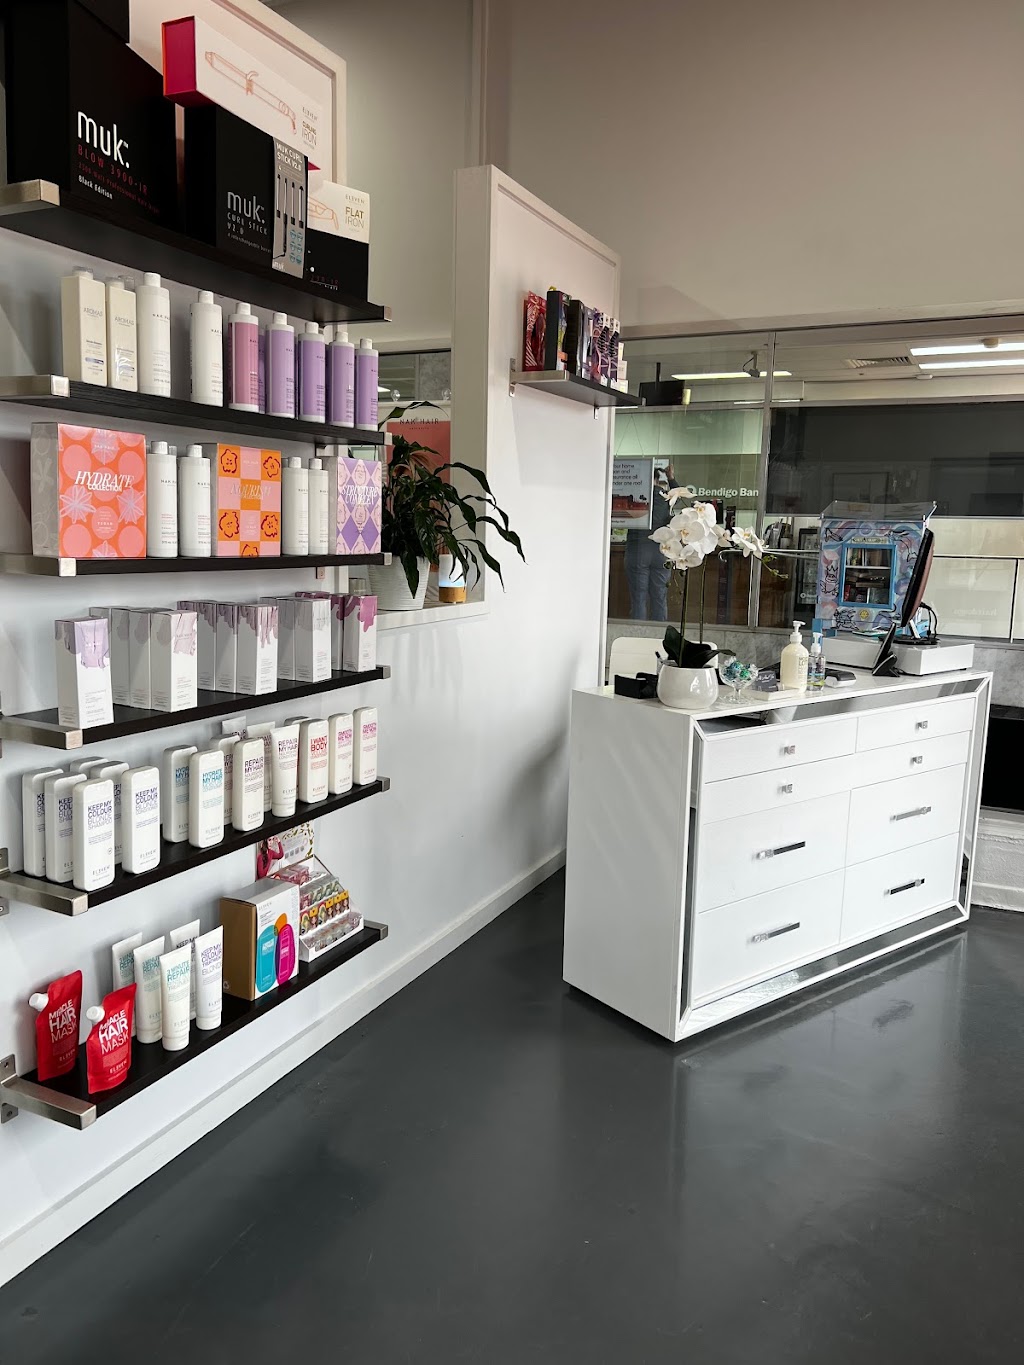 All About You Hair Studio | 3/348 Mountain Hwy, Wantirna VIC 3152, Australia | Phone: (03) 9729 2305